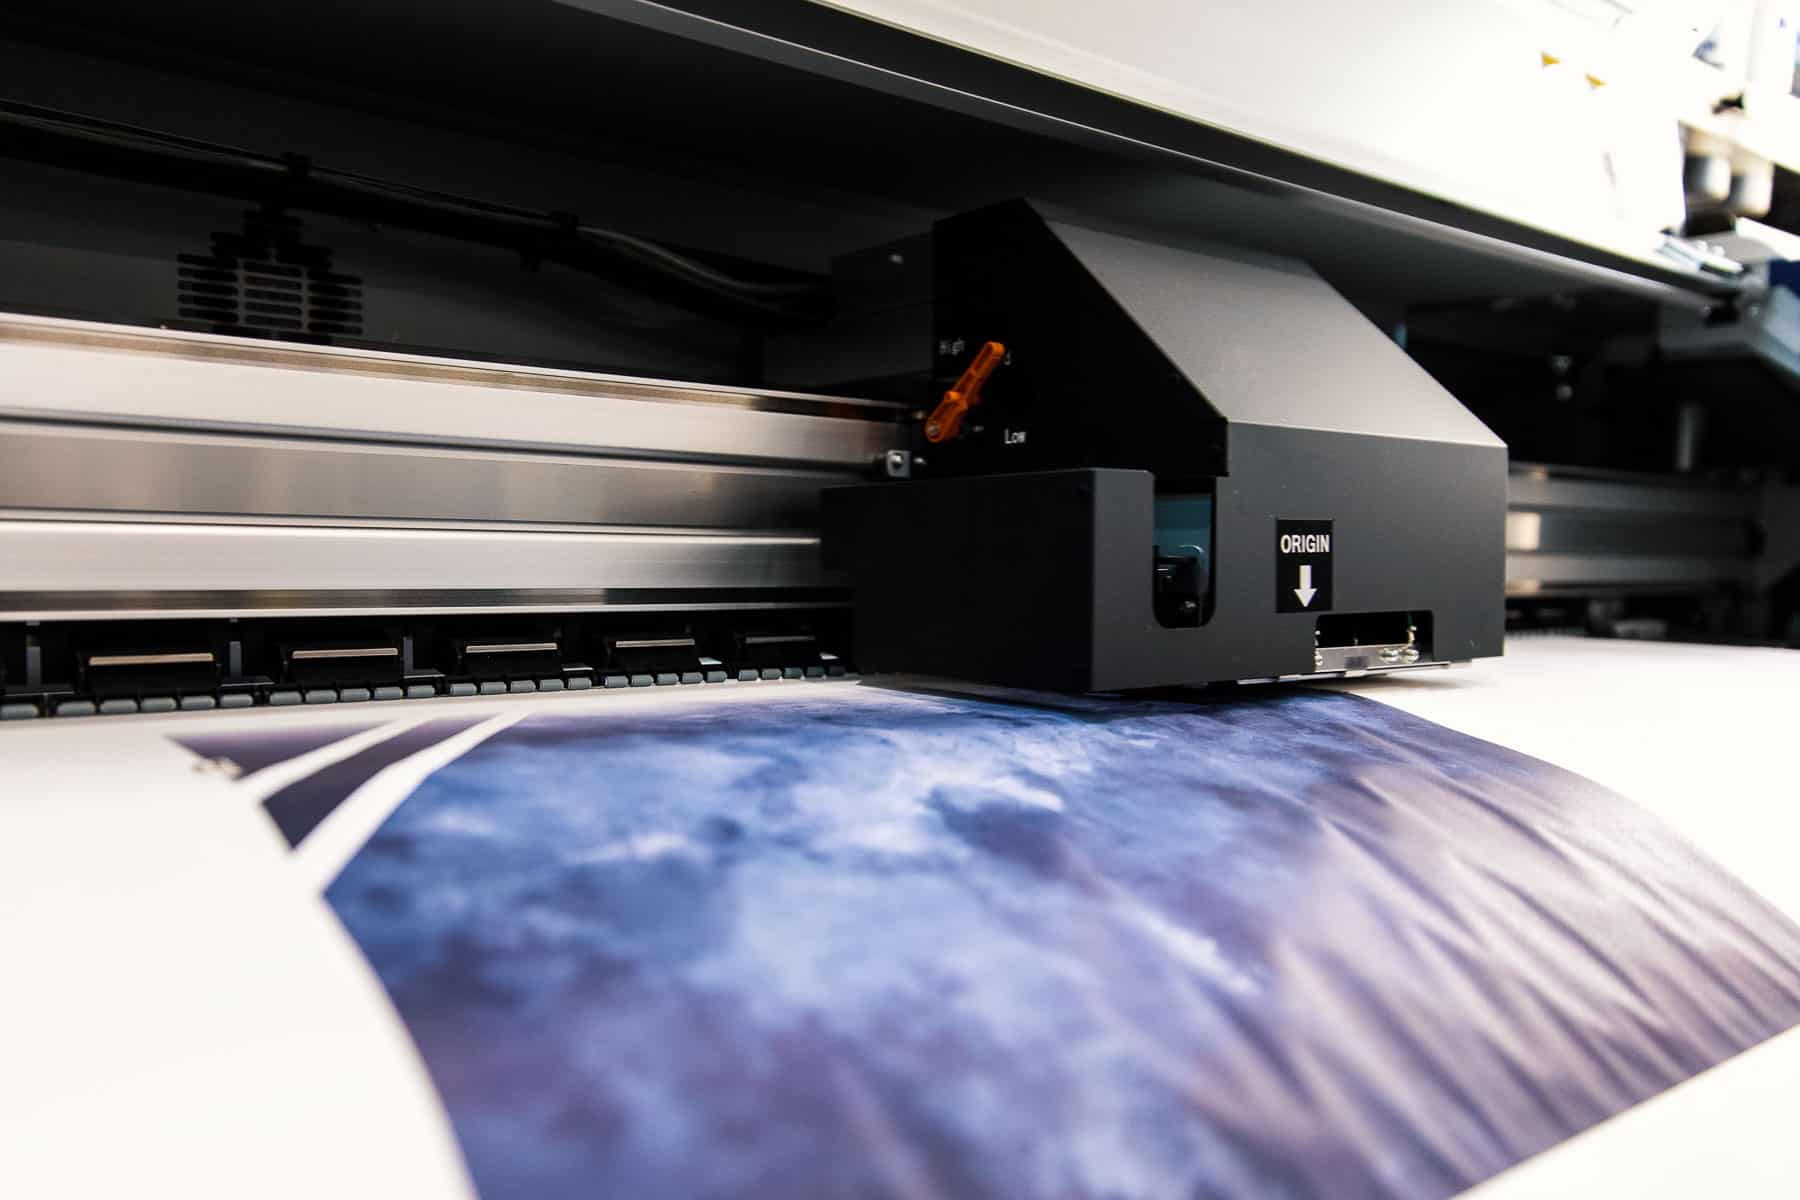 printing on the sublimation paper